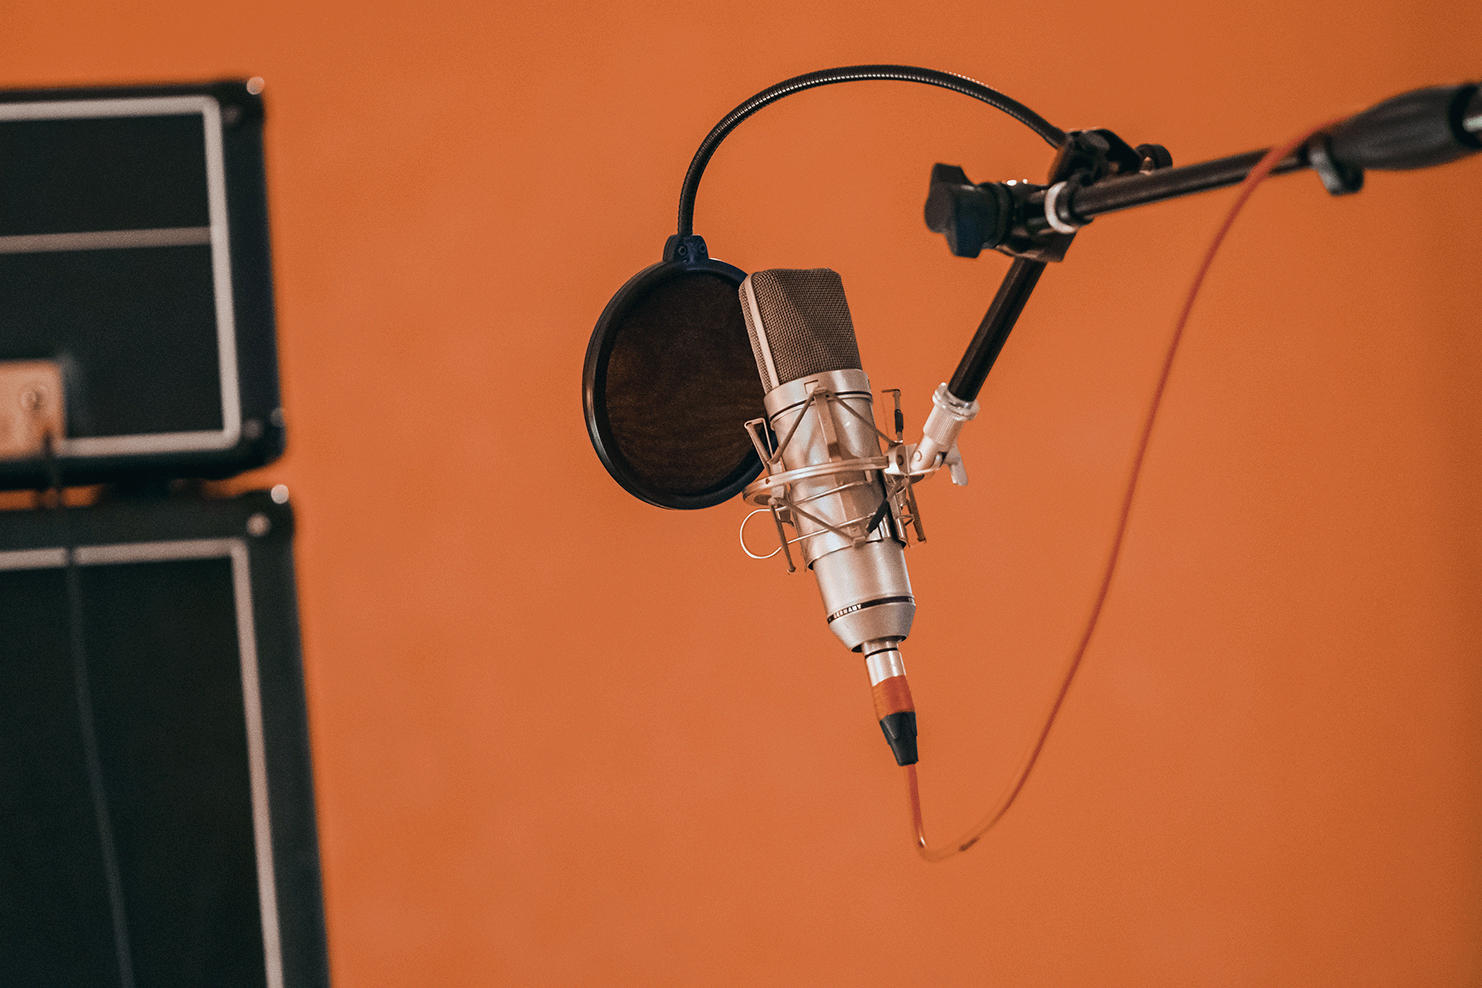 A professional microphone in front of an orange background